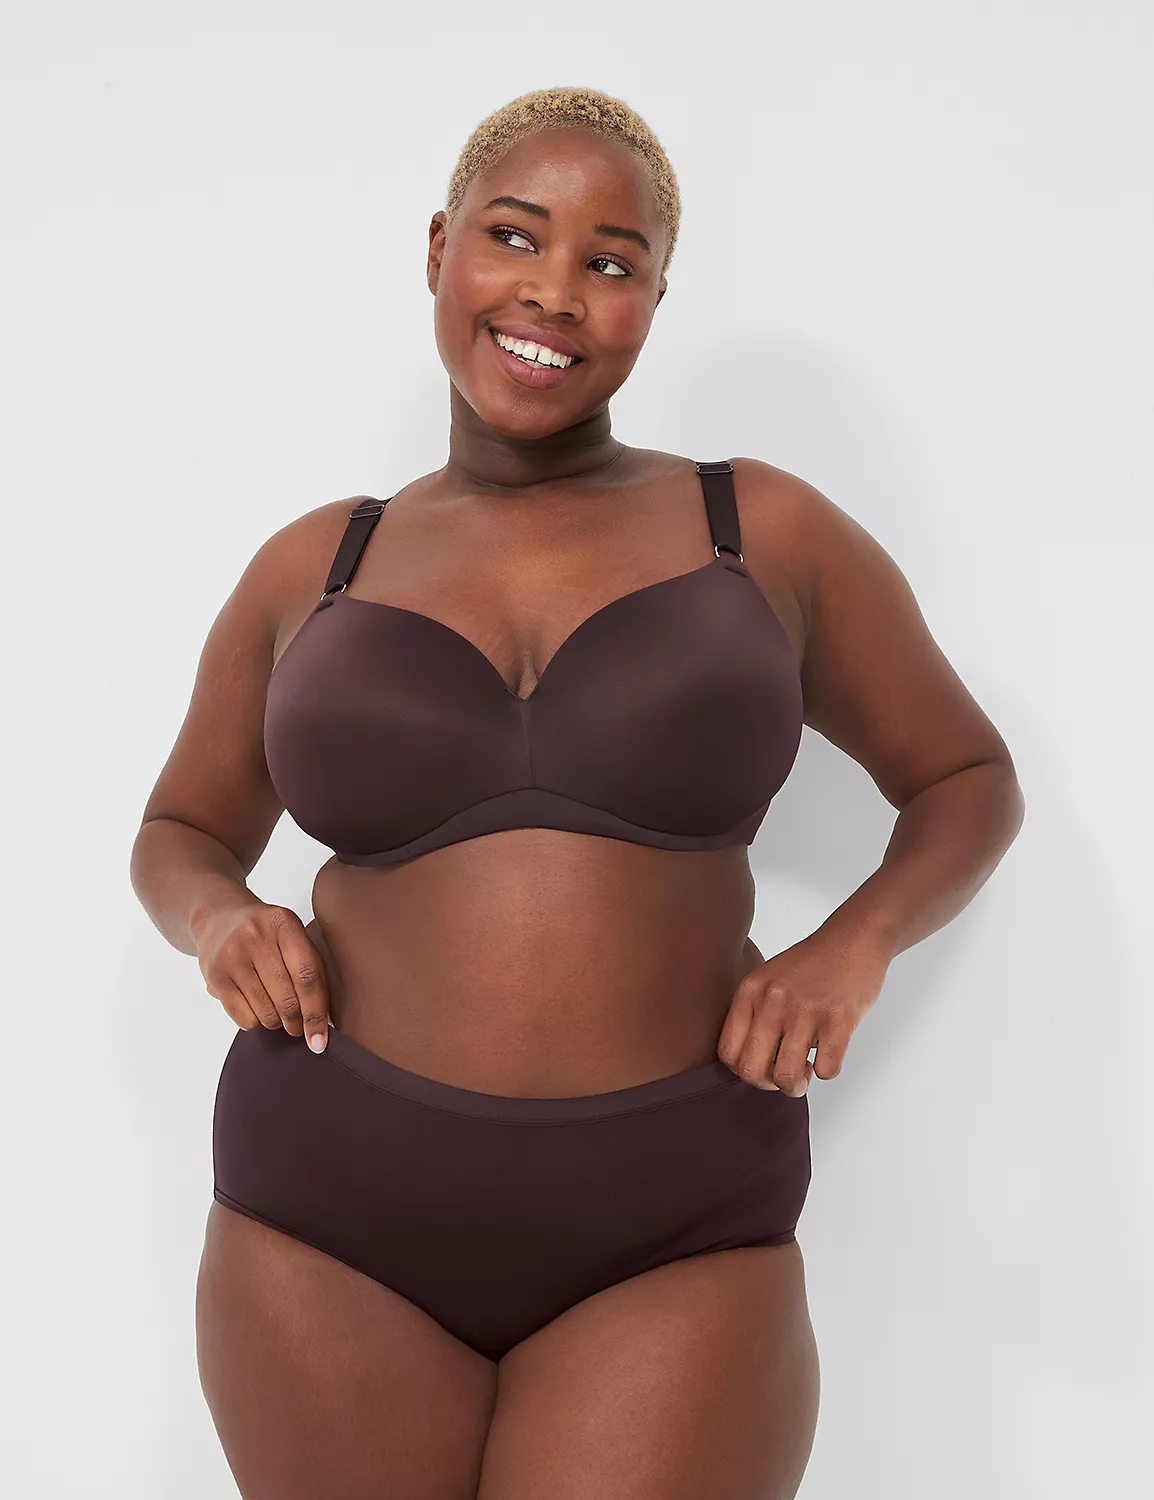 If You Have Big Boobs, Here Are 30 Bras Reviewers Swear Are Actually Comfortable